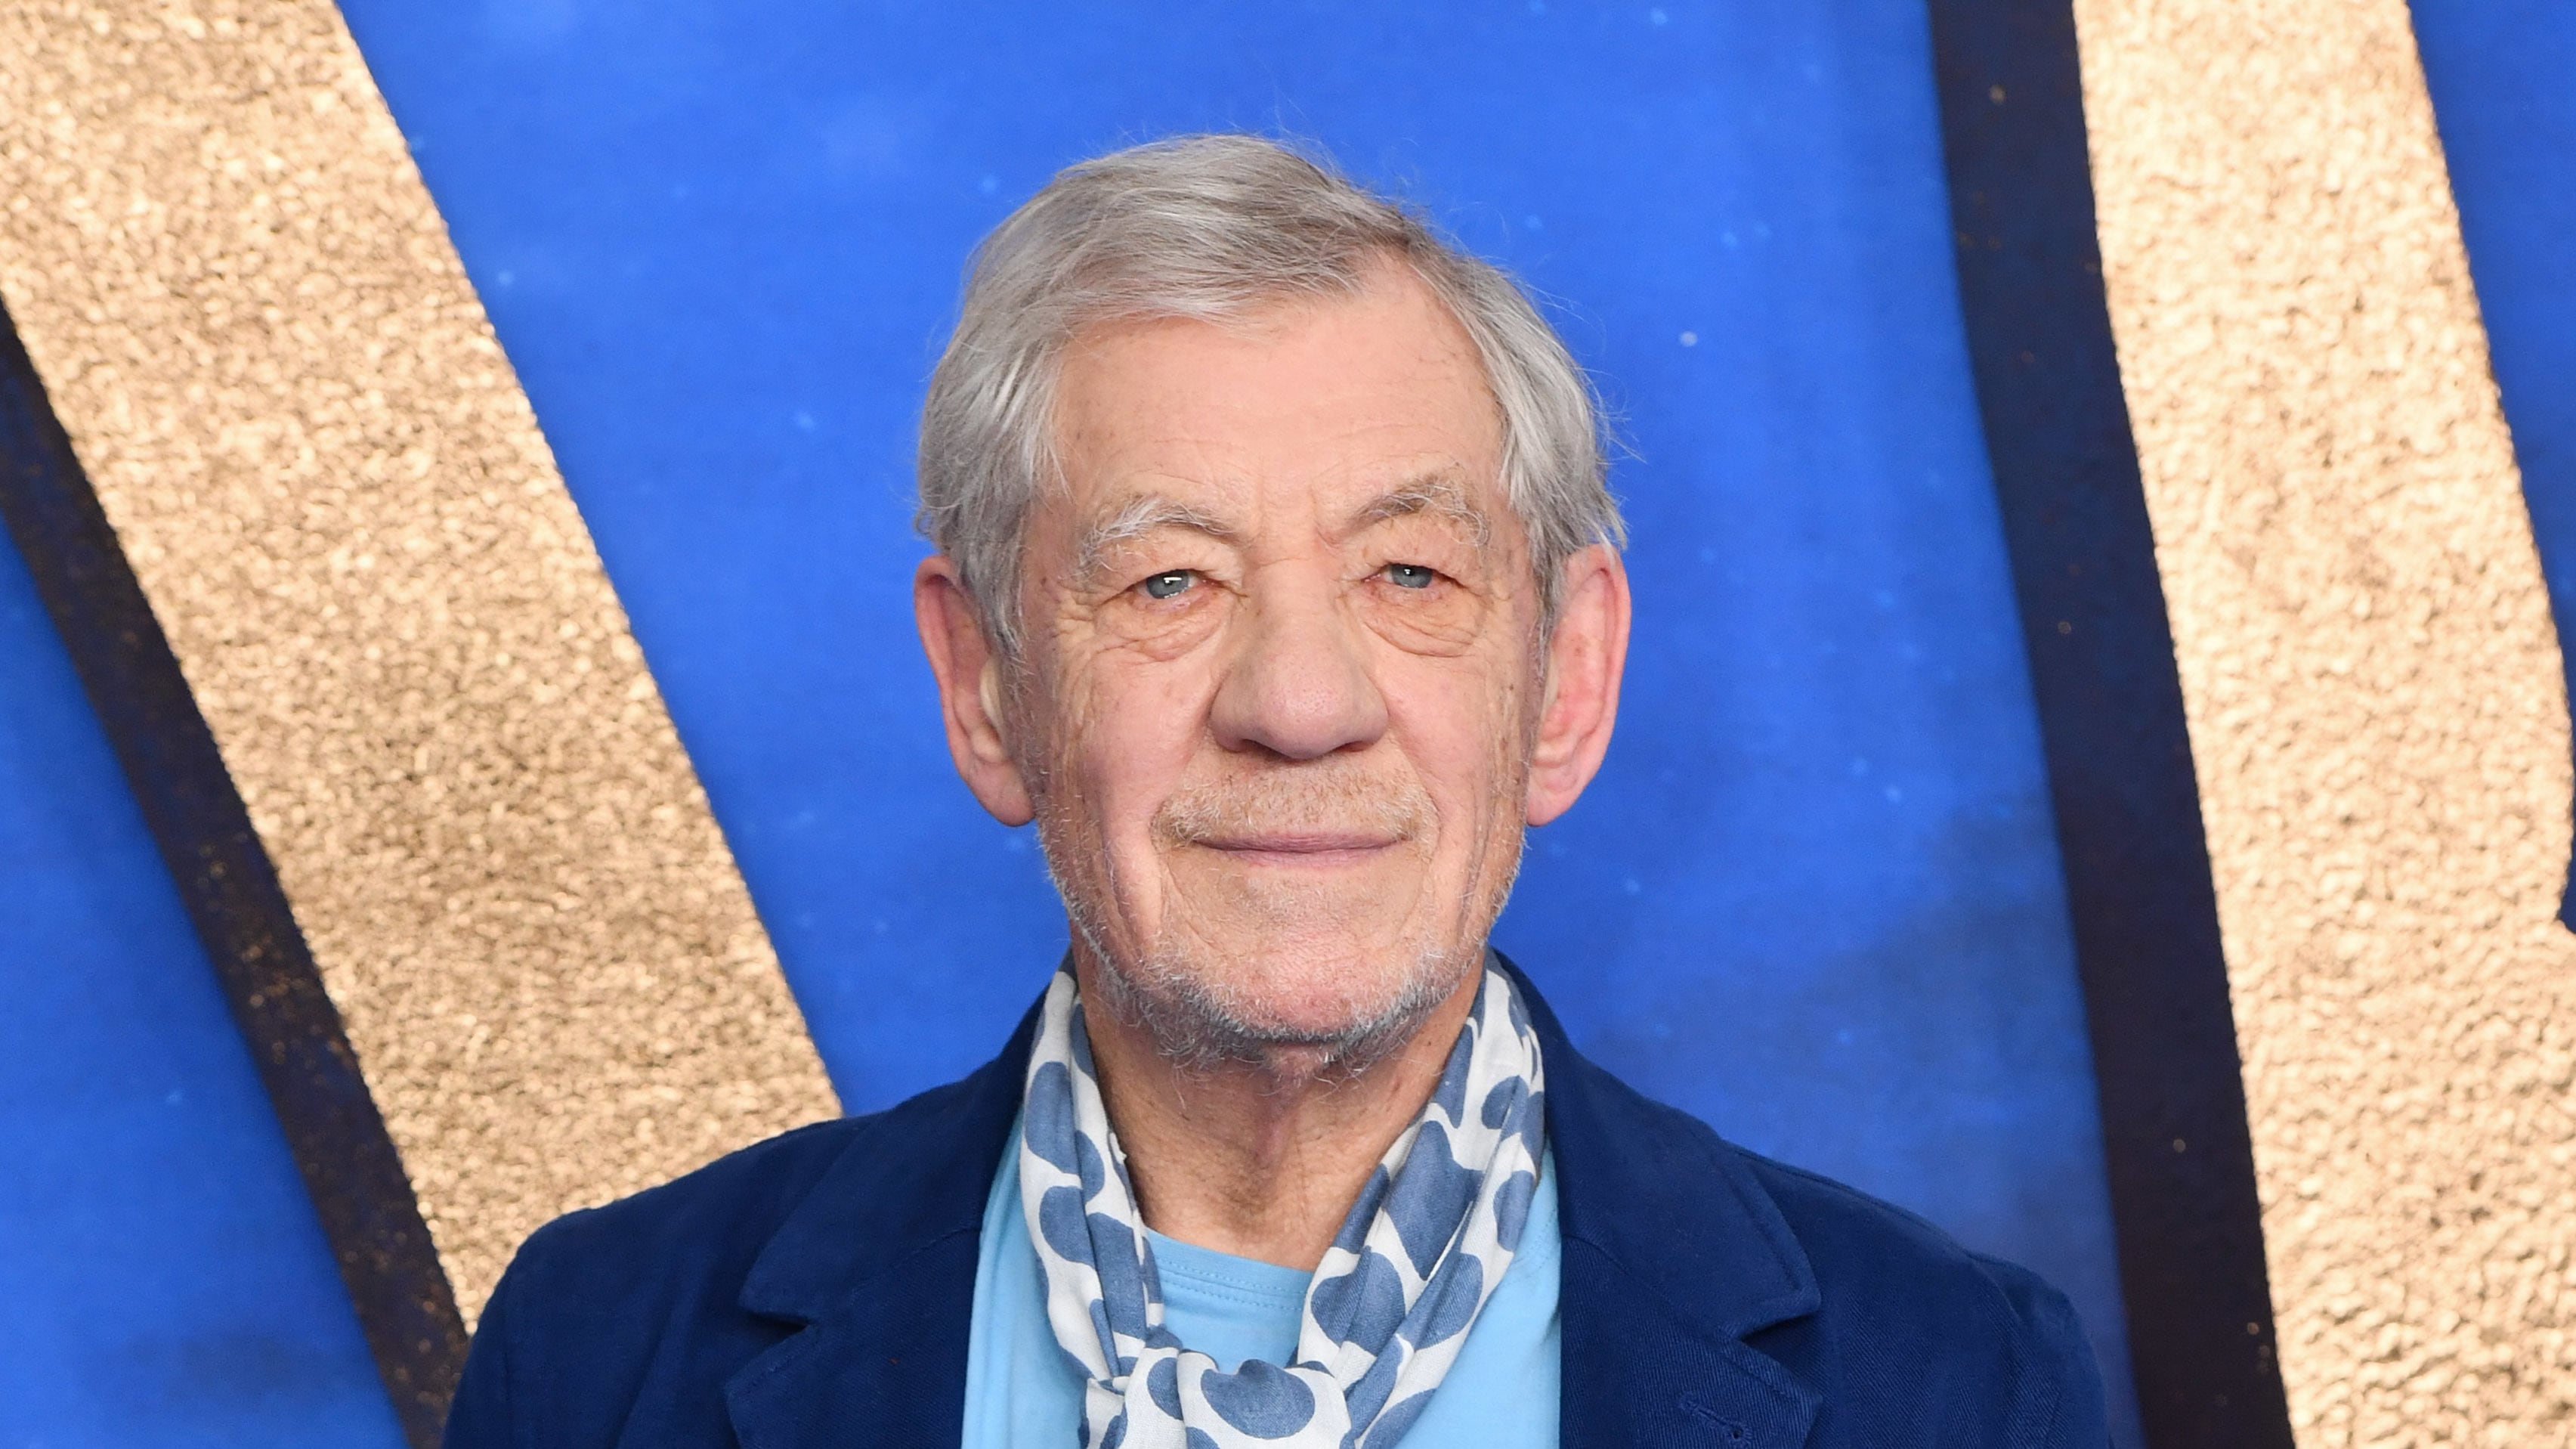 Sir Ian McKellen fell from the stage during a performance of Player Kings